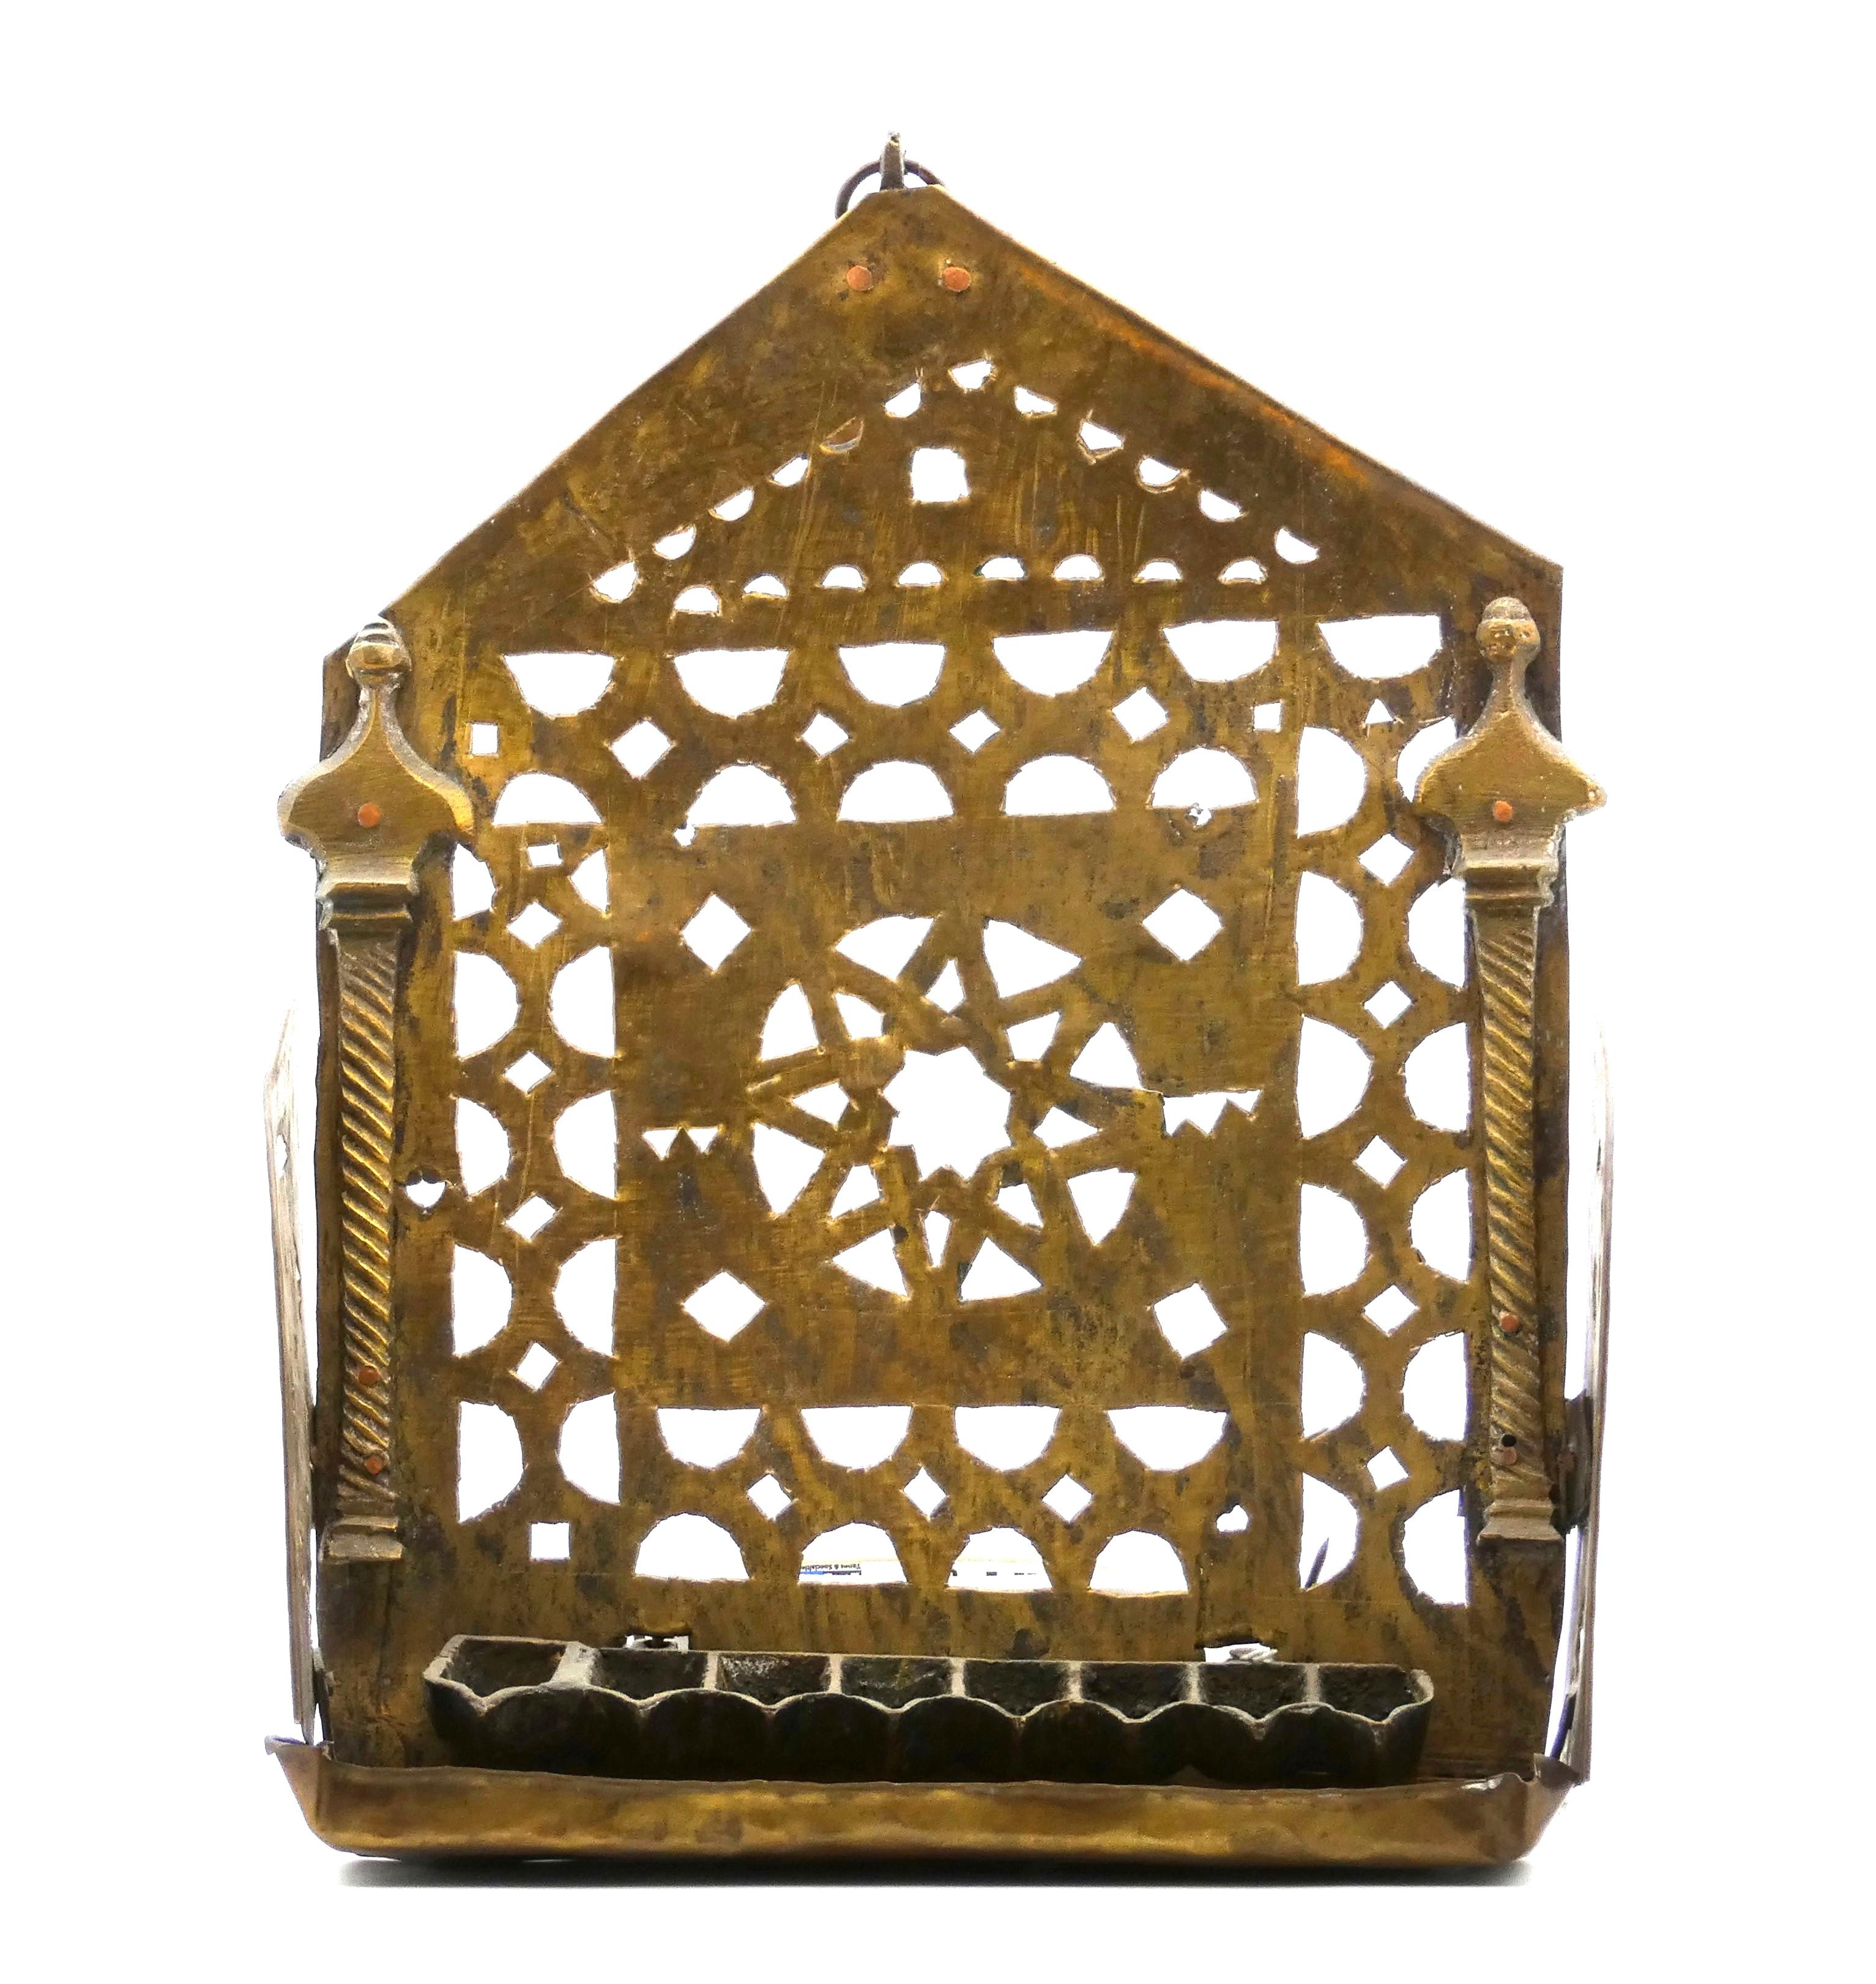 Moroccan Hanukkah Lamp decorated with columns and an authentic Star of David.

Openwork pierced backplate with numerous quatrefoil cut-outs and framed by two twisting architectural columns flanking an authentic cut-out Star of David.

A thick cast